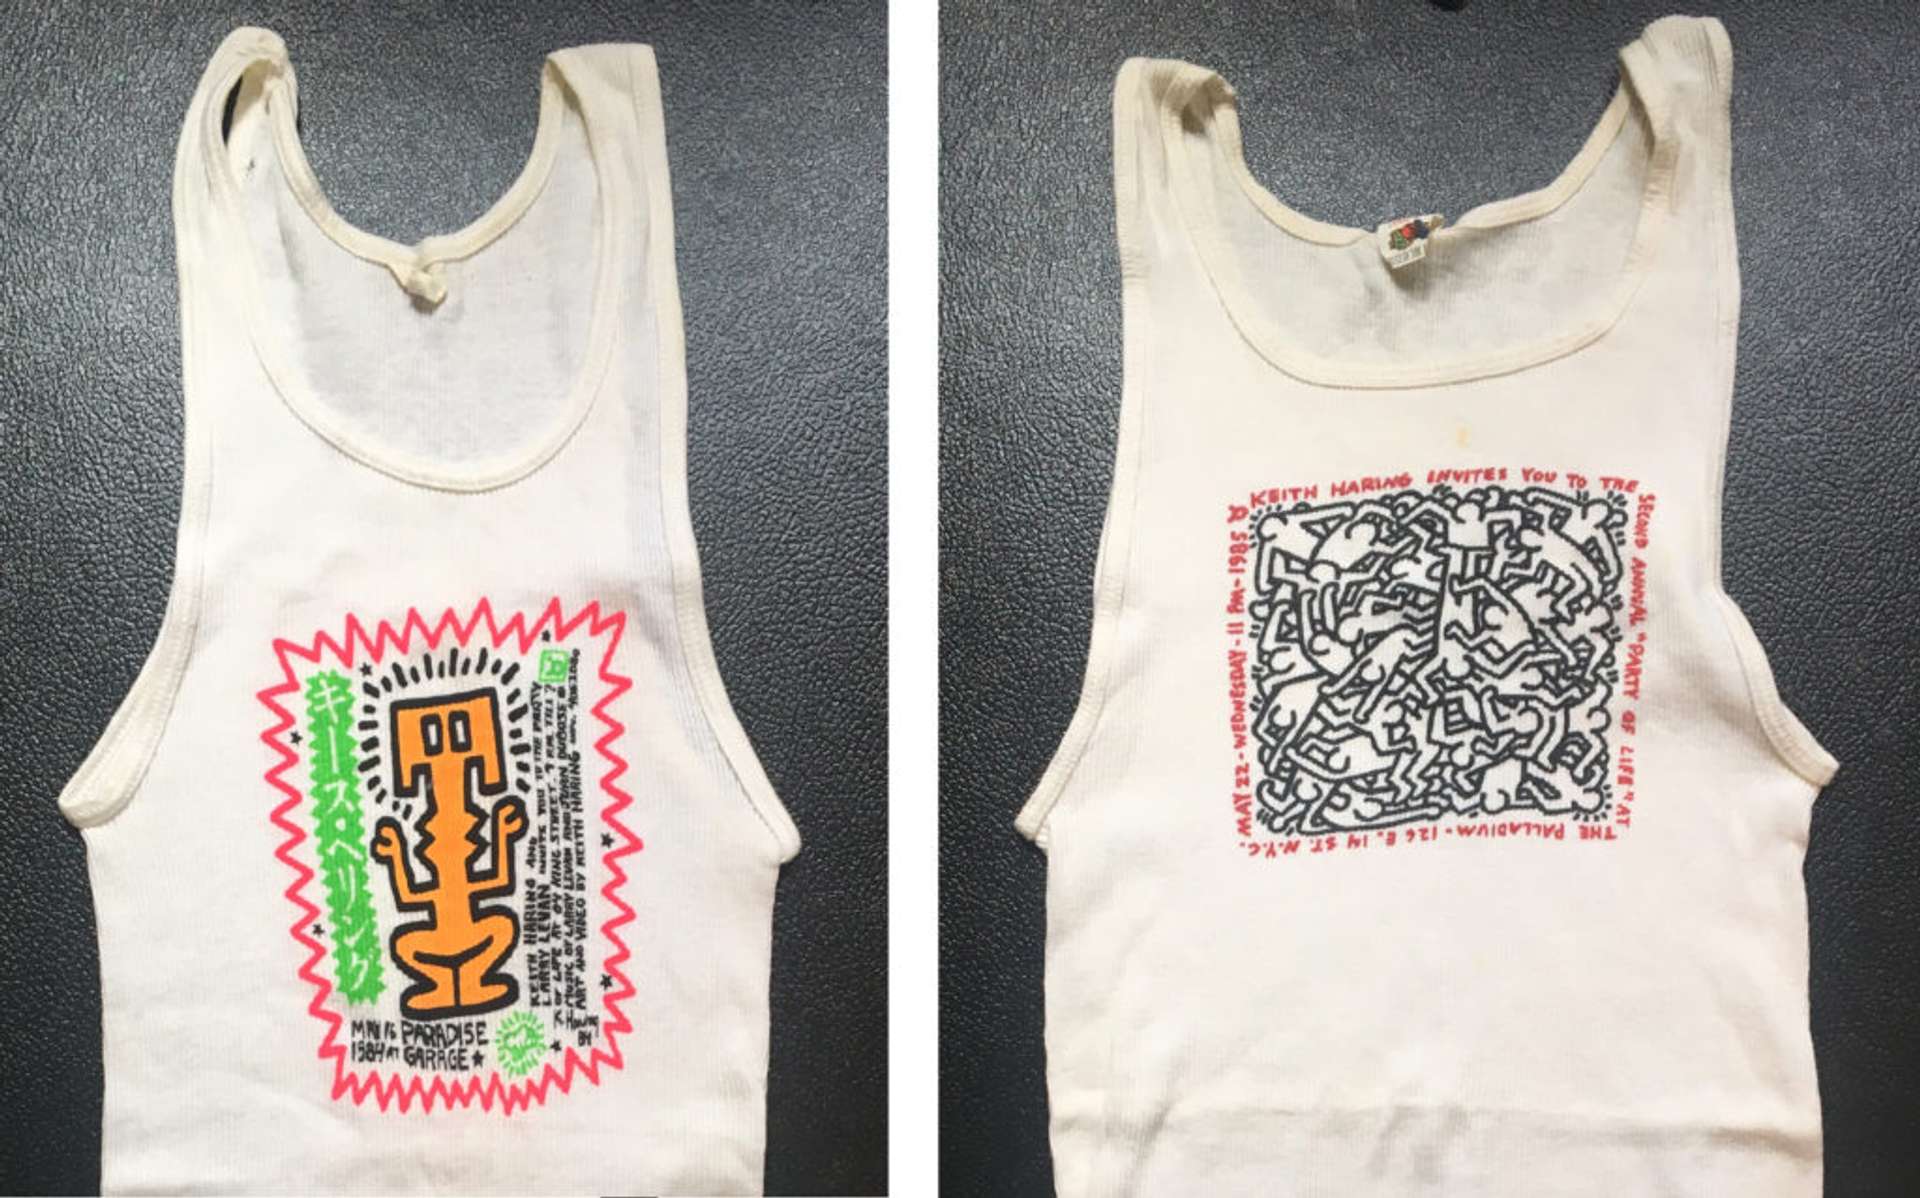 A double panel view of Keith Haring’s silk-screened tank tops from The Annual Party of Life.  Two white tank tops with Keith Haring’s Pop Art style of figures.